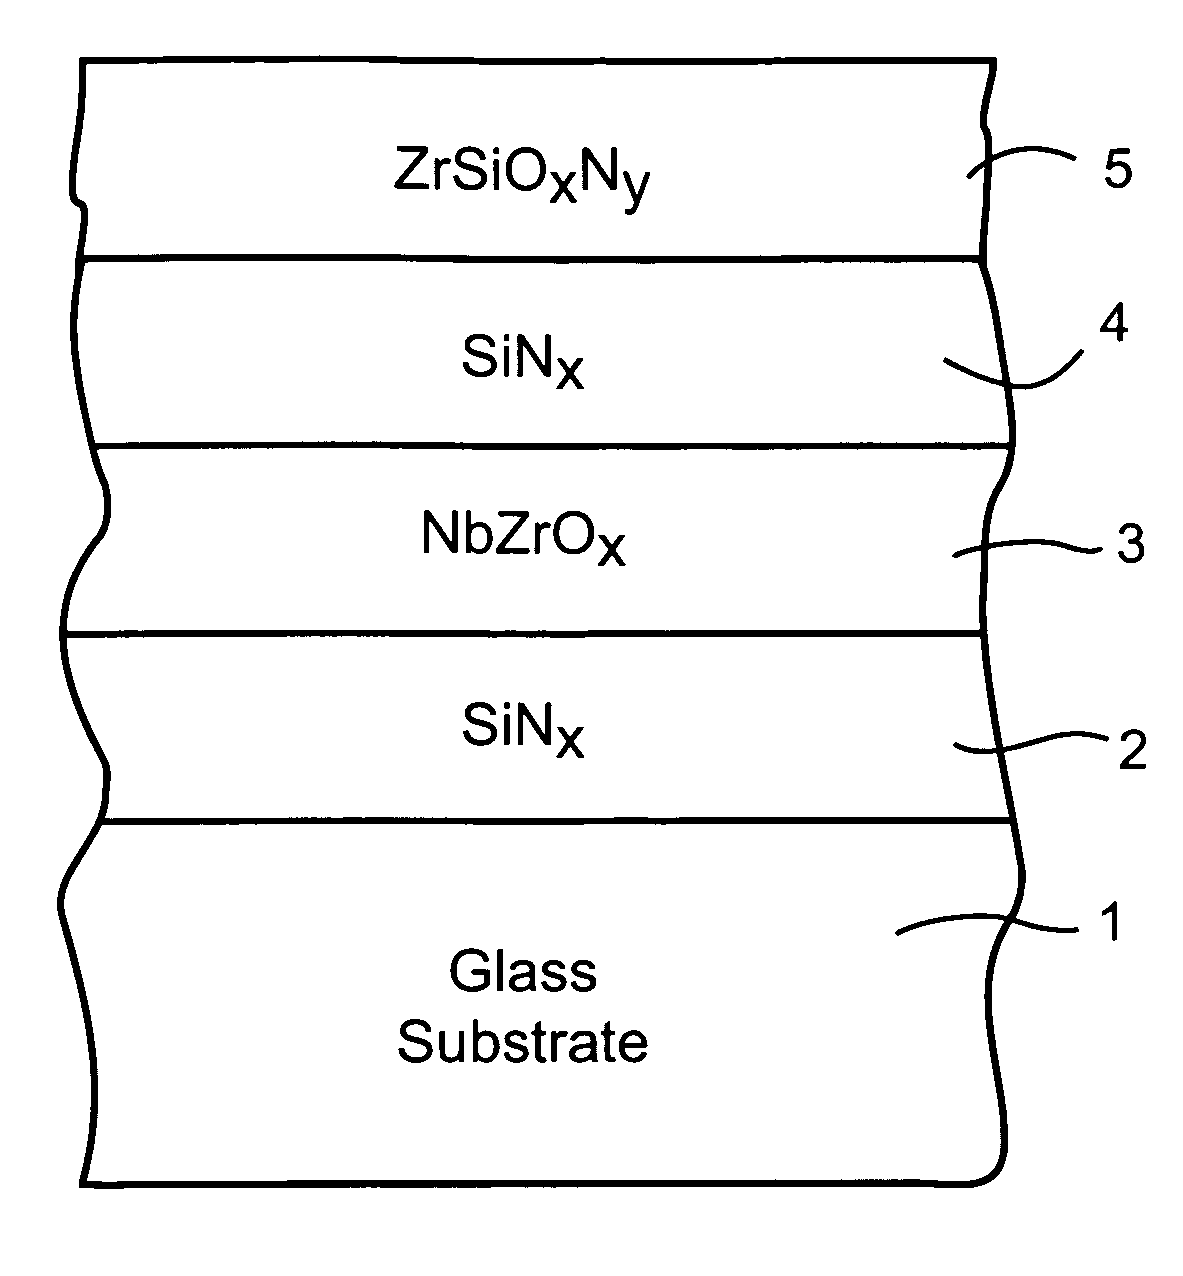 Heat treatable coated article with zirconium silicon oxynitride layer(s) and methods of making same